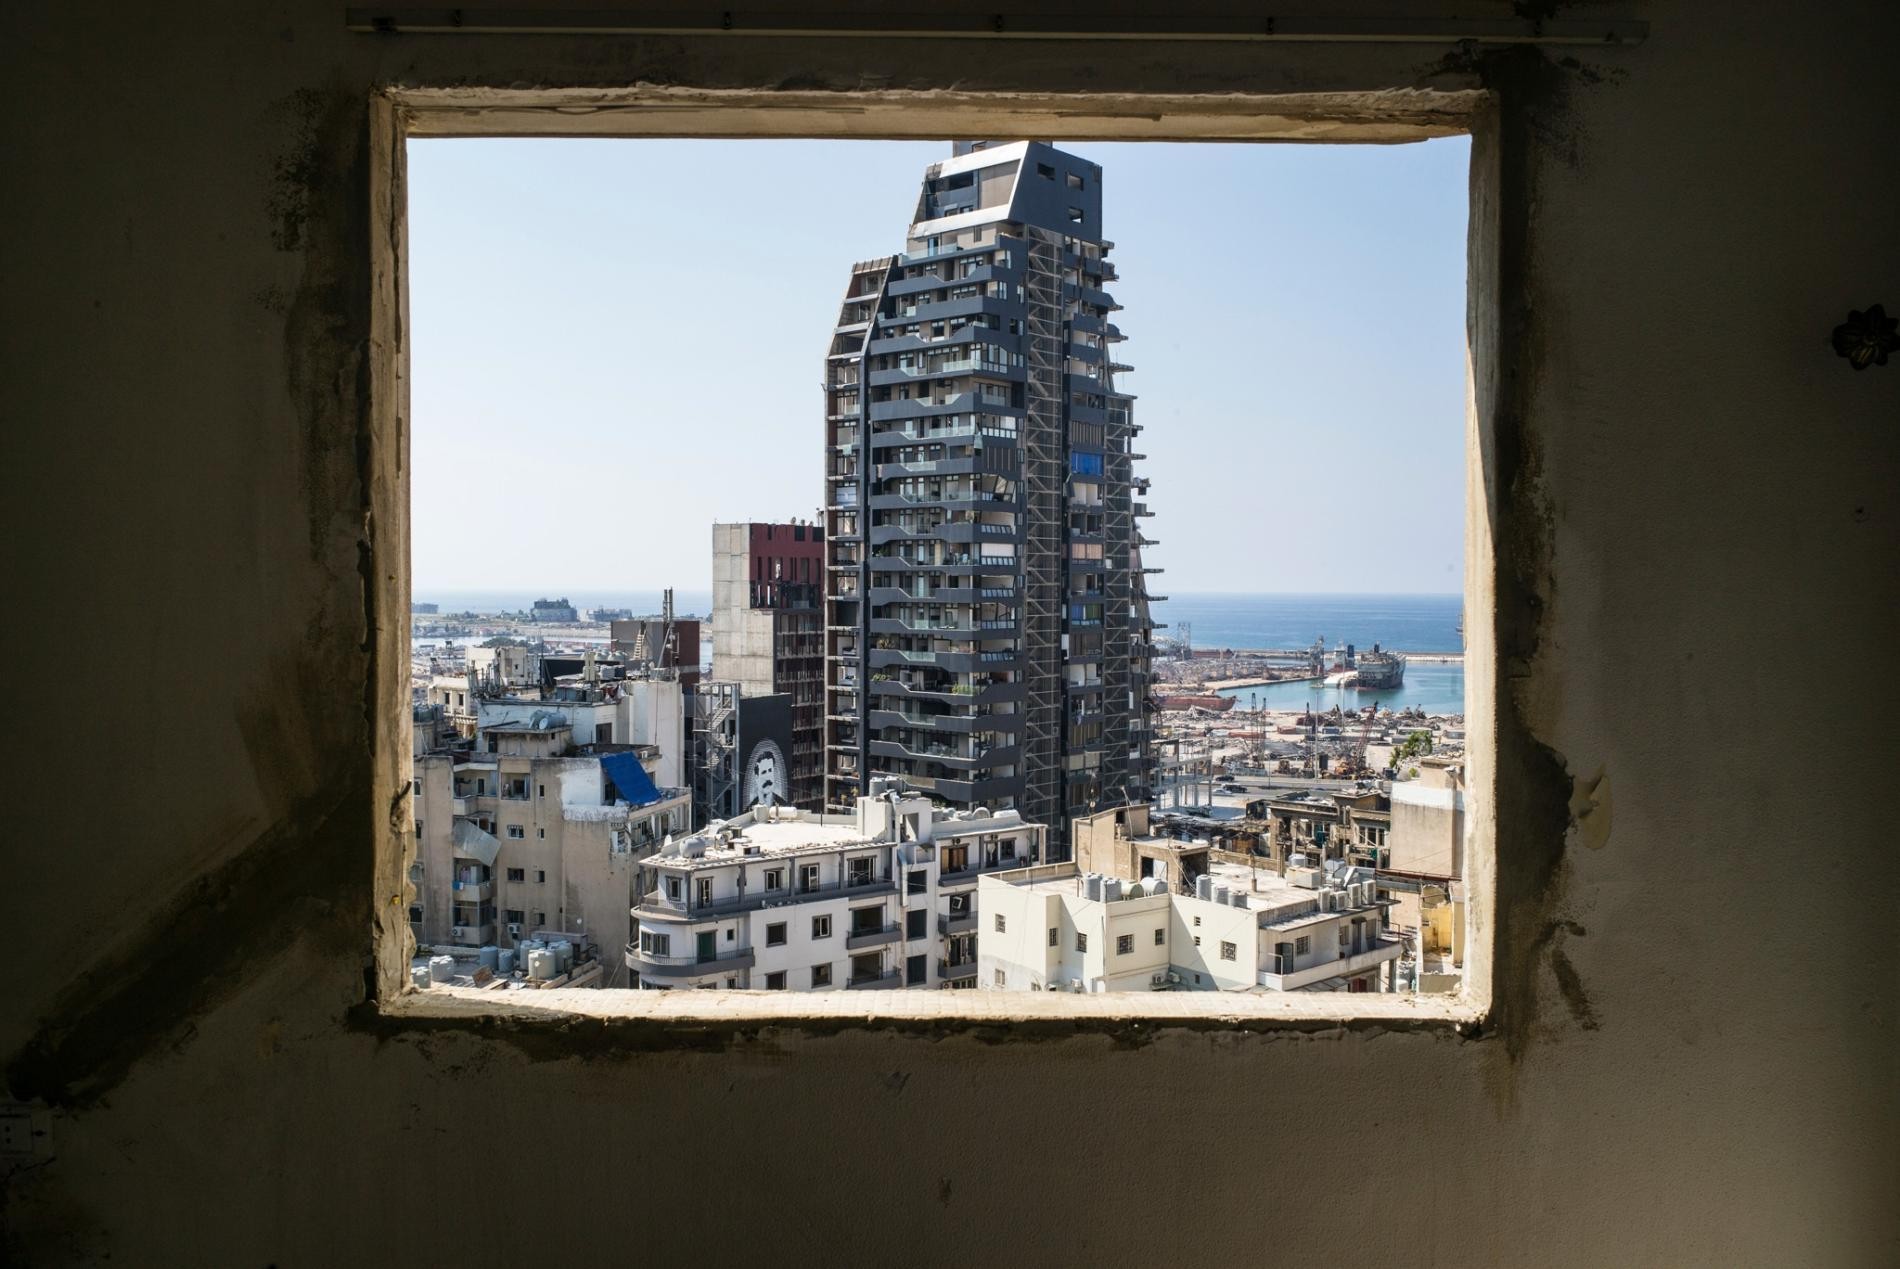 Beirut has rebuilt before. Here’s how the city will do it again.